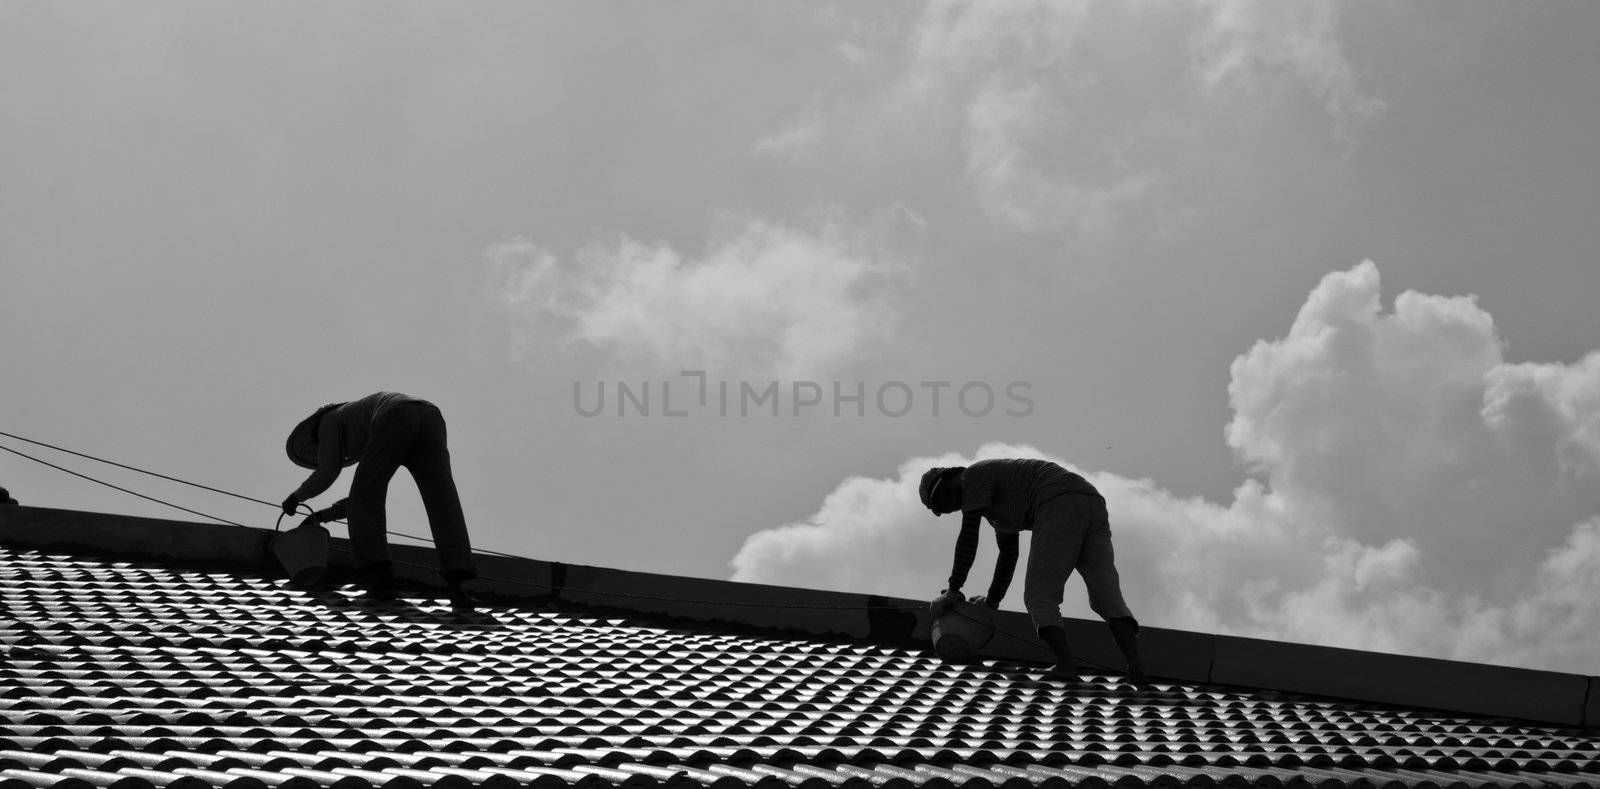 Two workmen repair roof in a hot afternoon